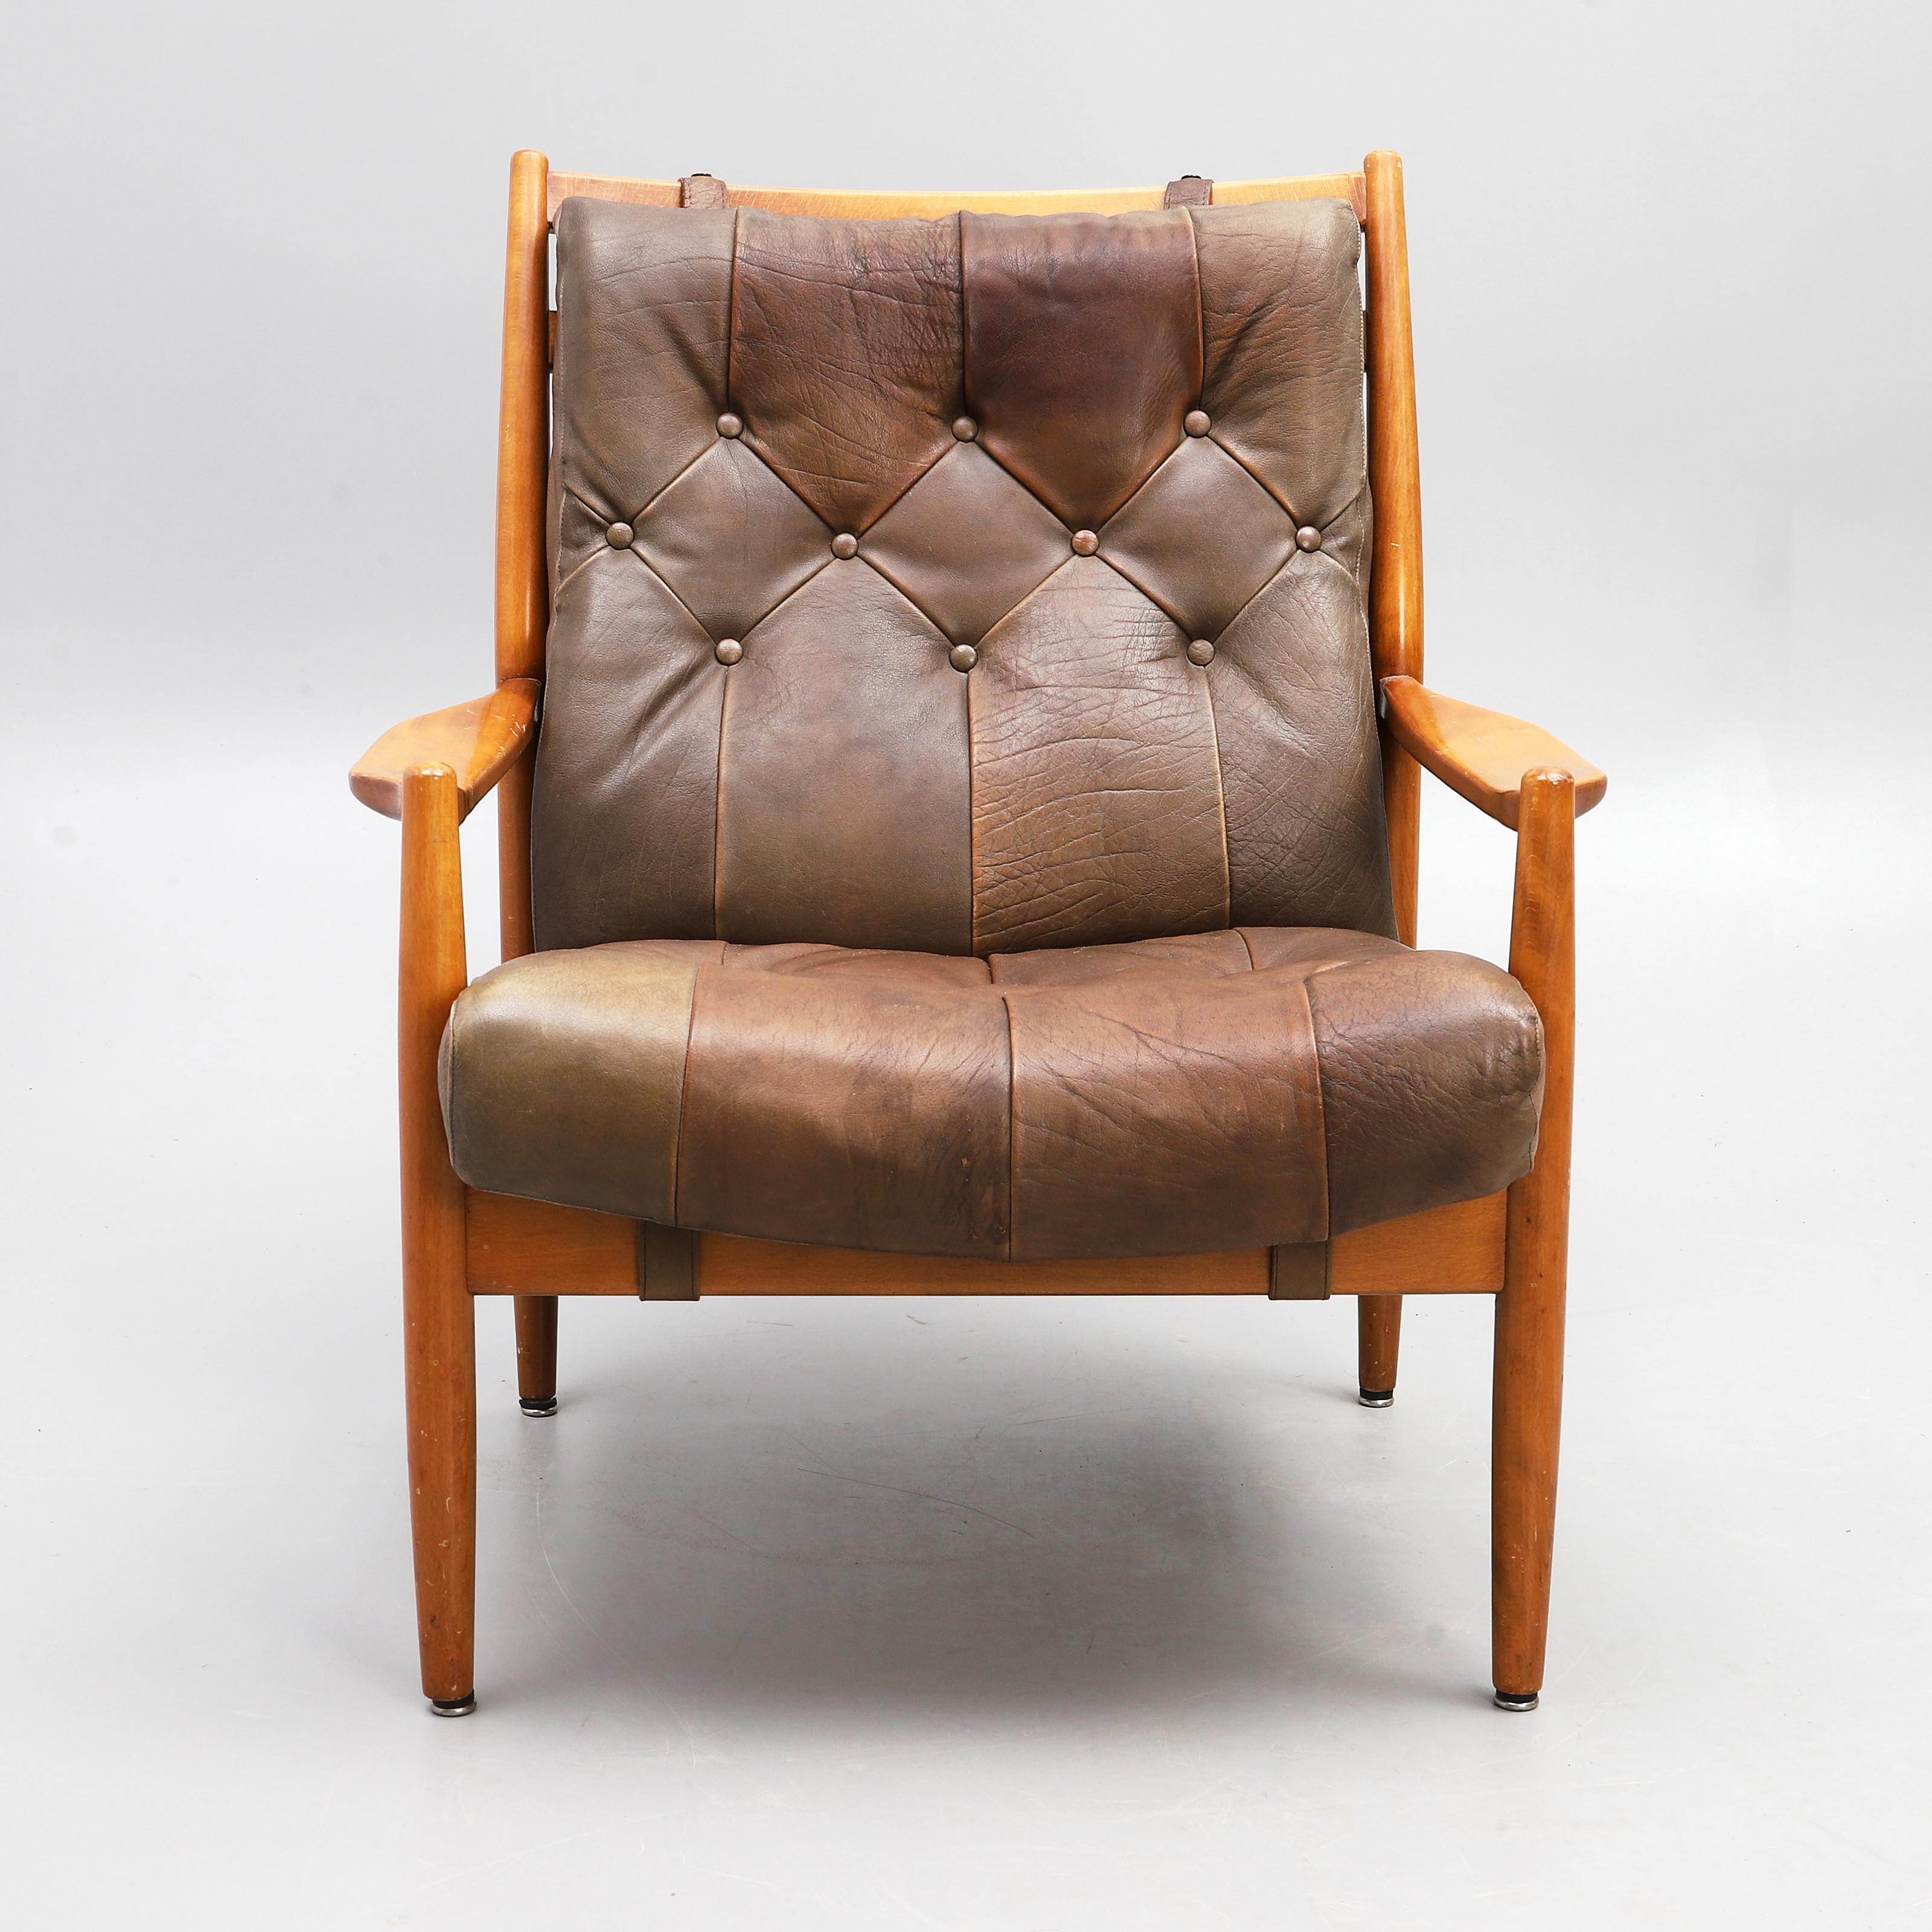 Ingemar Thillmark Lacko Armchair for OPE Mobler, Sweden, 1960 In Good Condition For Sale In Paris, FR